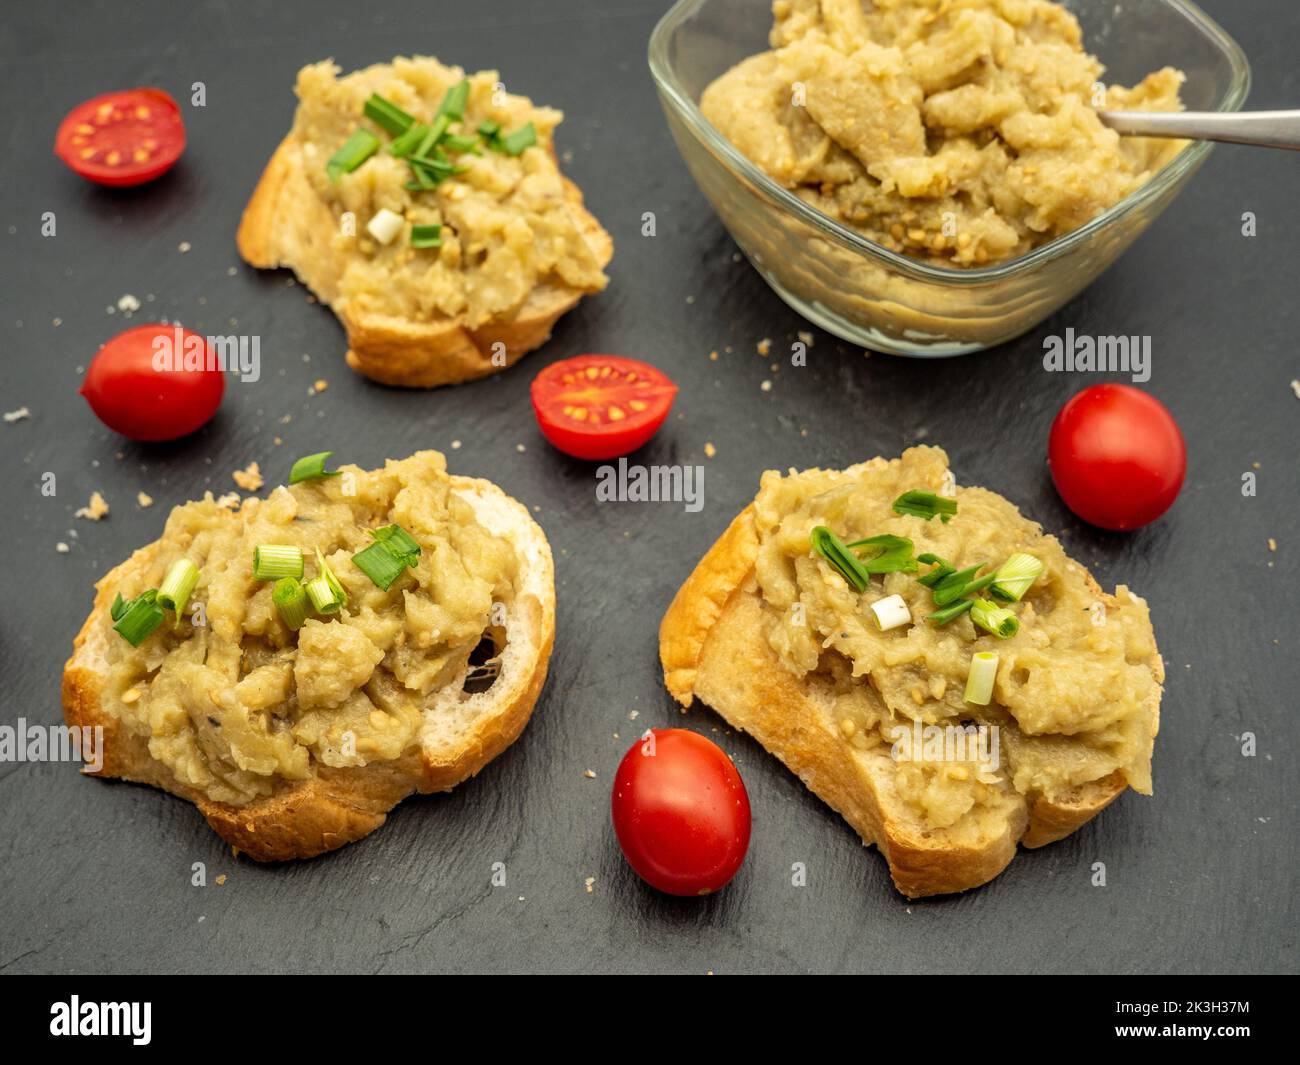 appetizer romanian eggplant salad with onion and tomatoes spread on bread Stock Photo